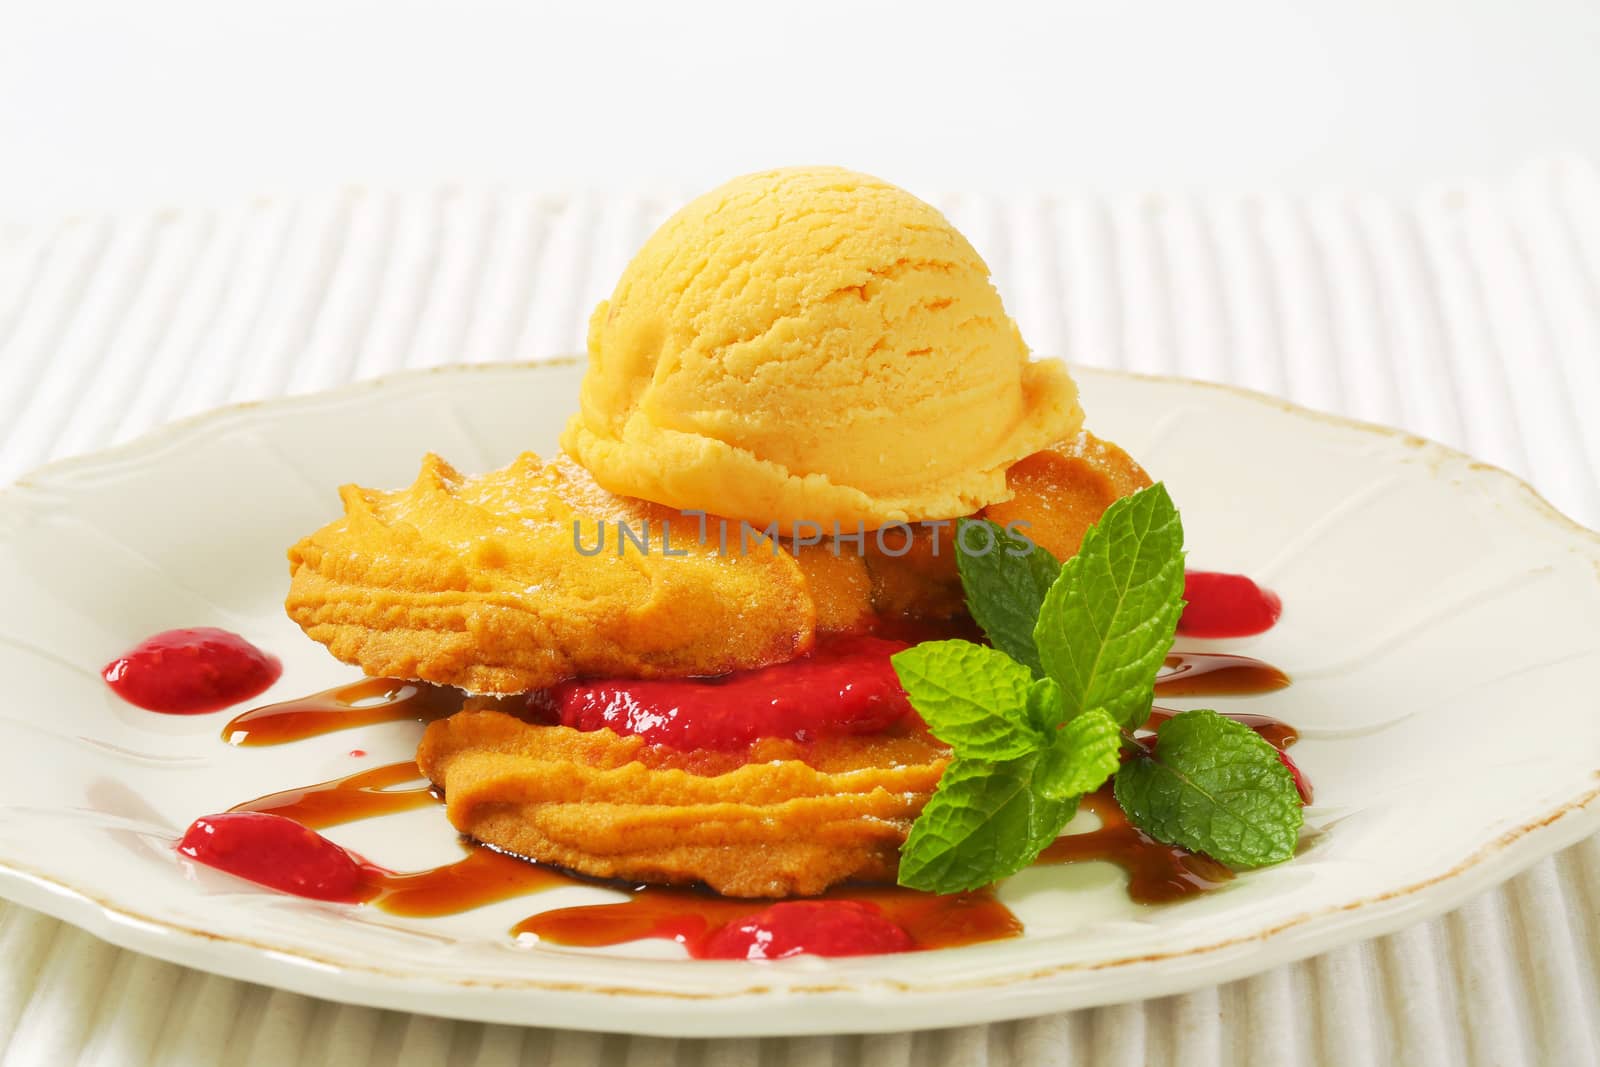 Spritz butter cookies with raspberry sauce and scoop of yellow ice cream